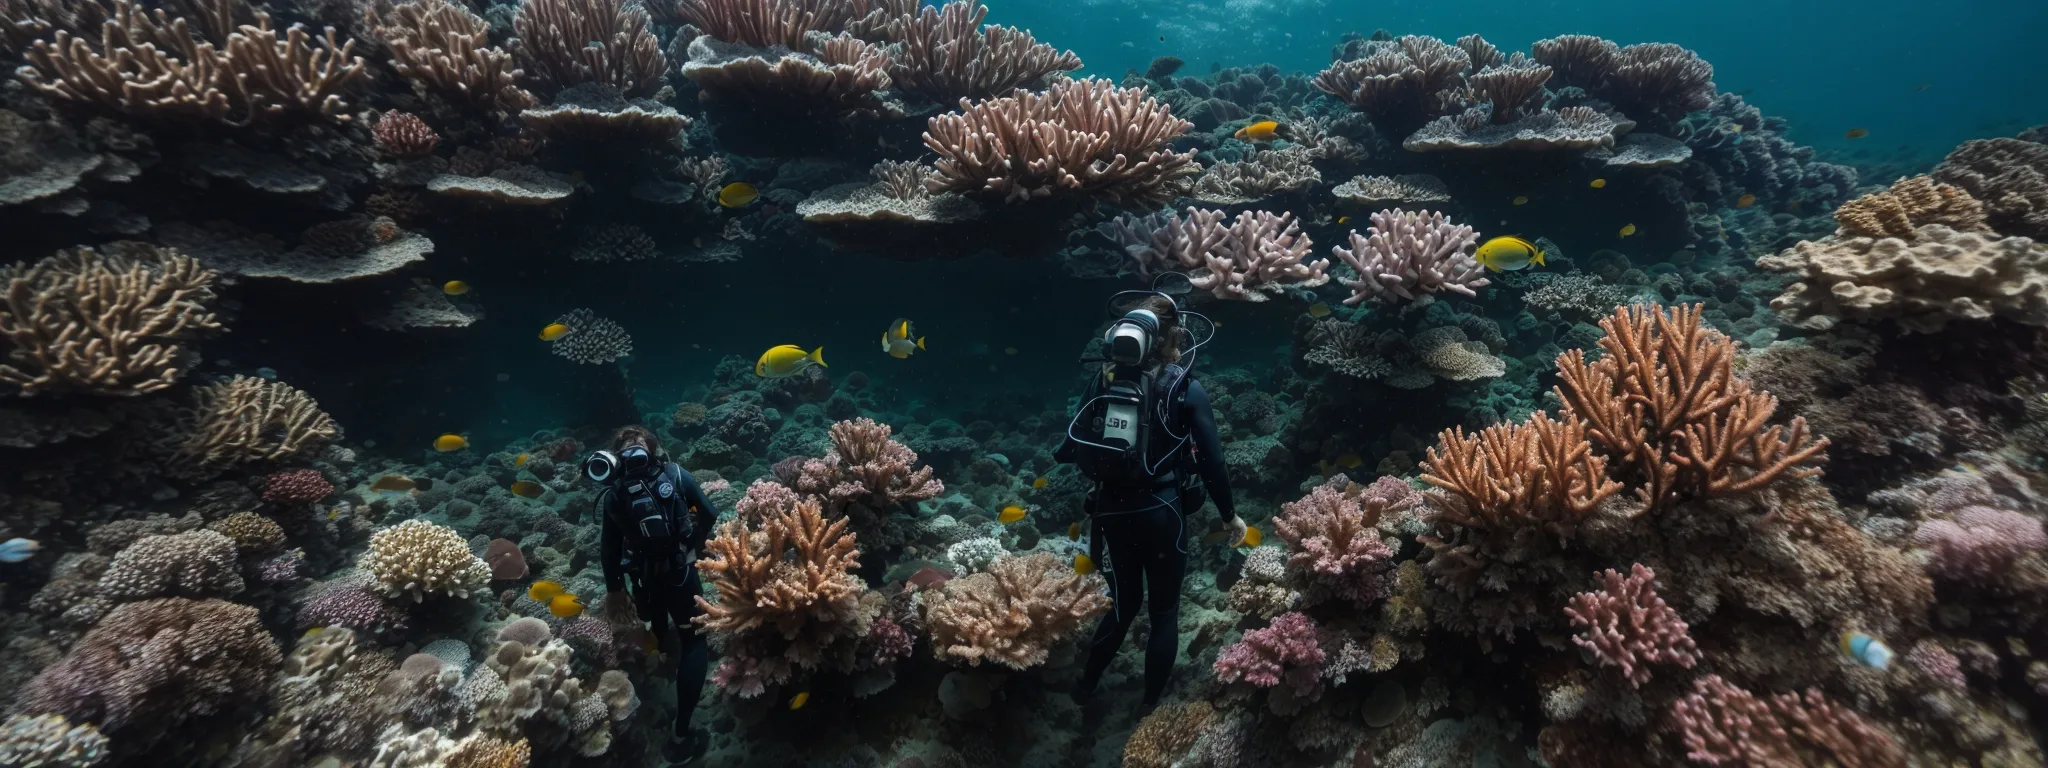 a person in a wetsuit investigates a coral reef, symbolizing the exploration of seo depths.